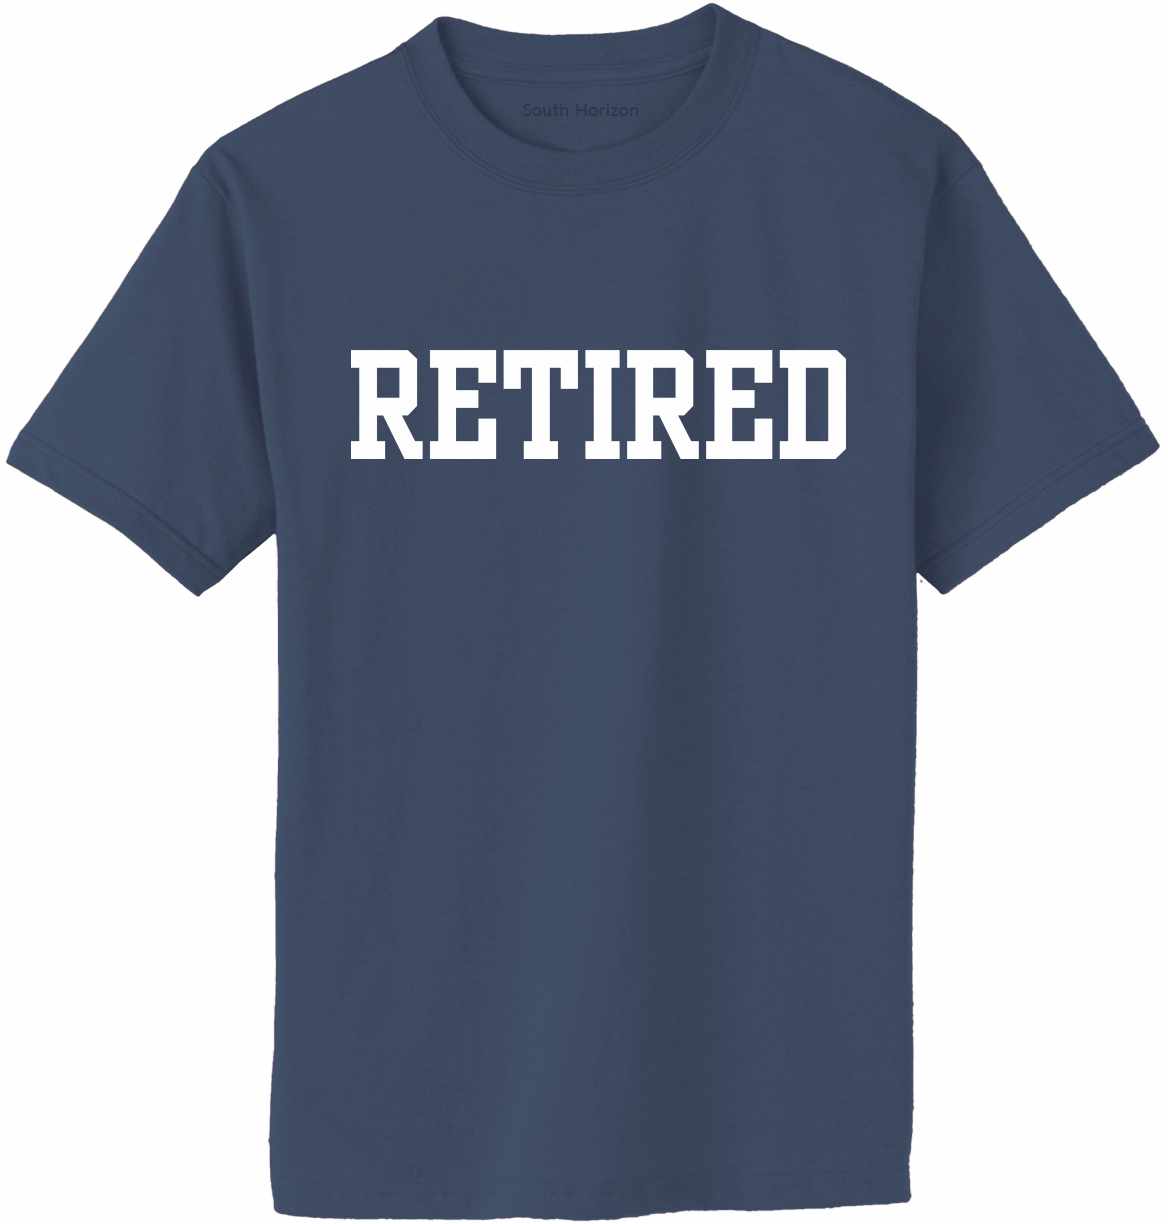 RETIRED on Adult T-Shirt (#1184-1)